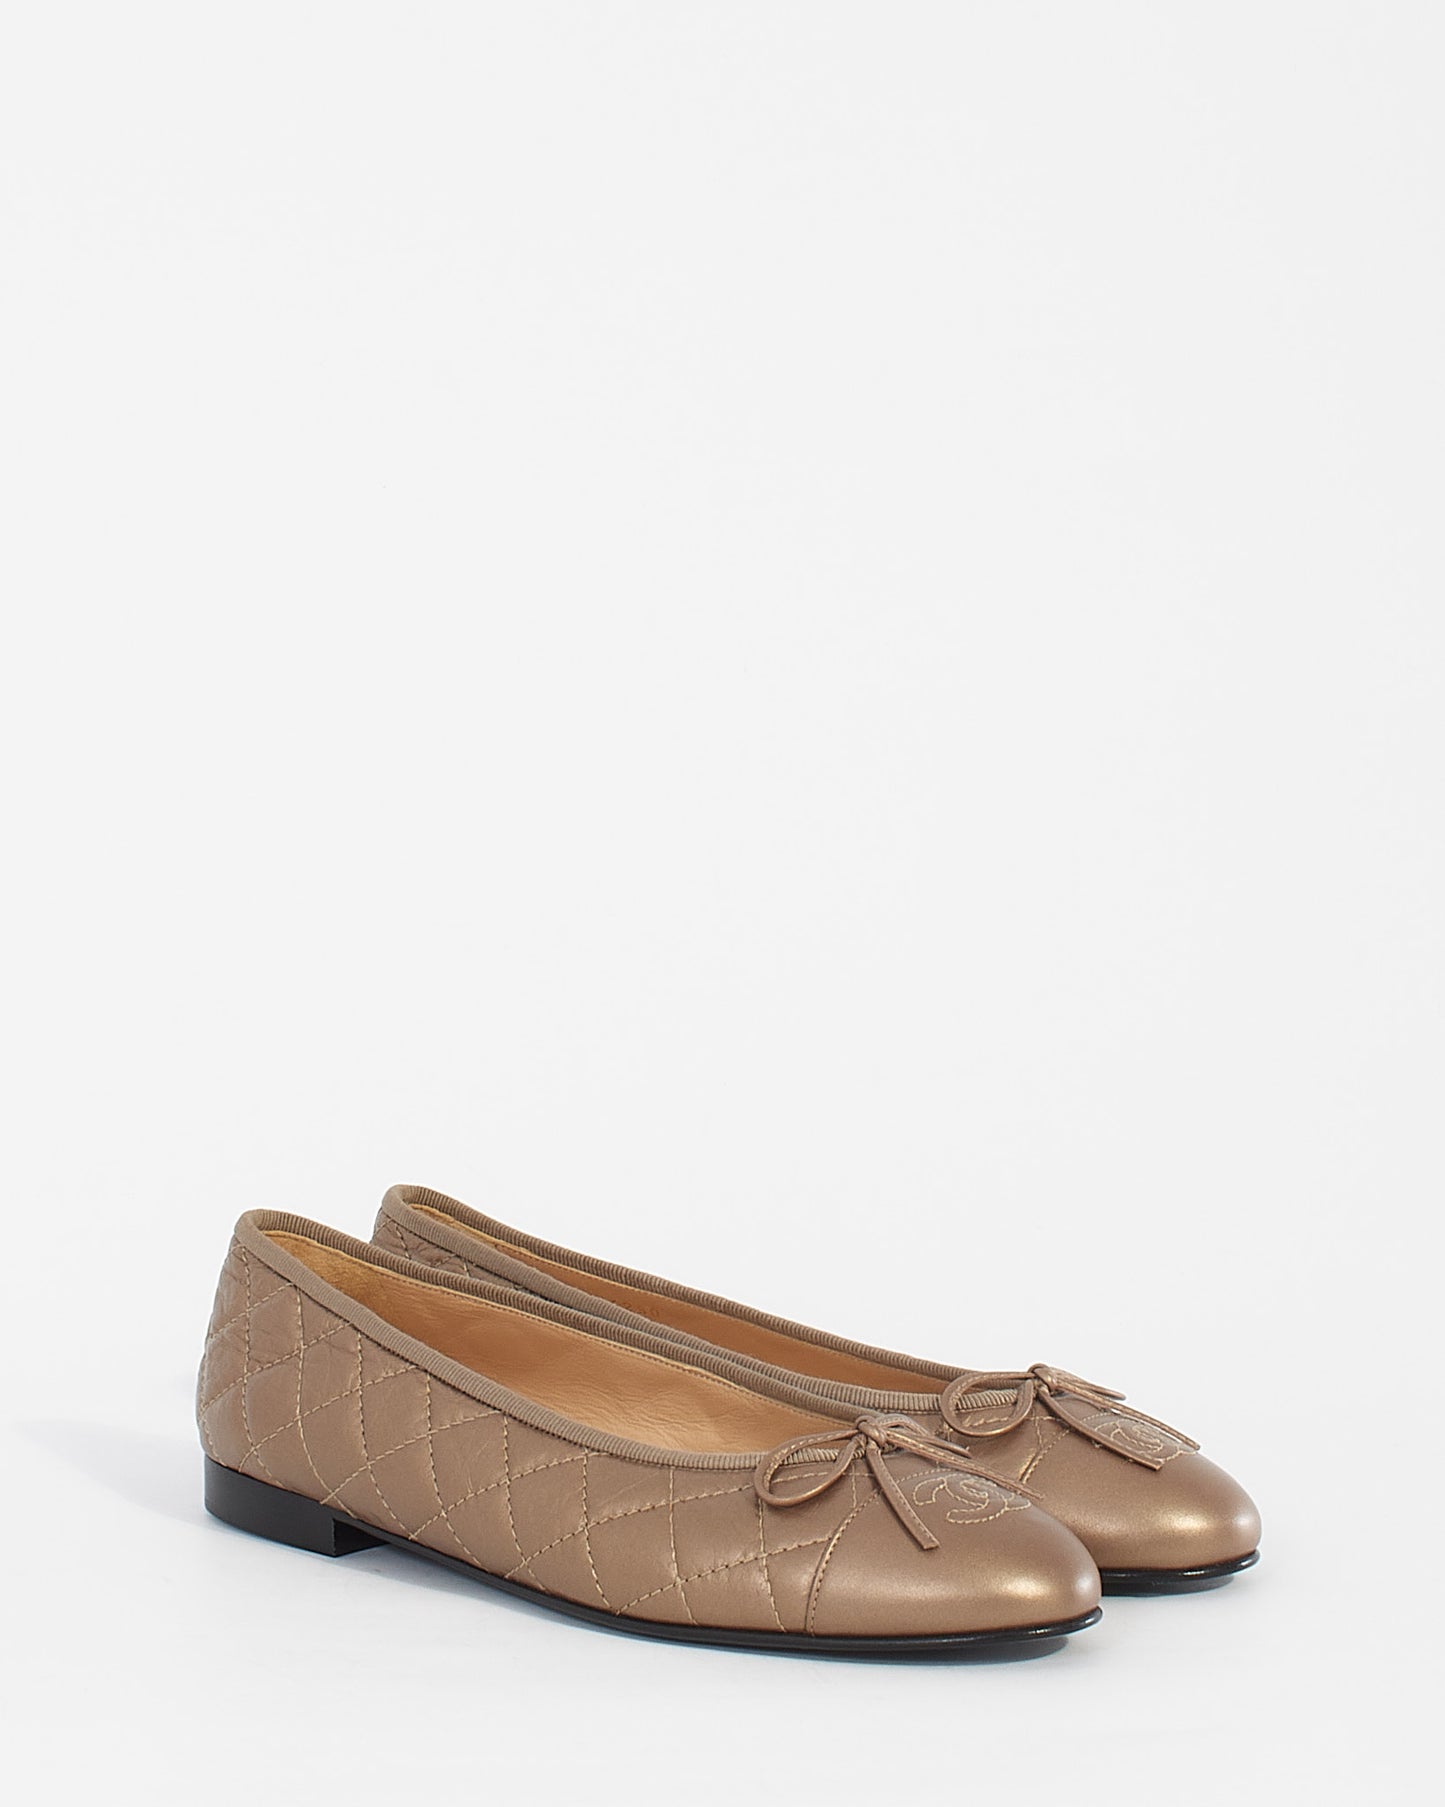 Chanel Metallic Bronze Quilted Leather CC Ballerina Flats - 39.5